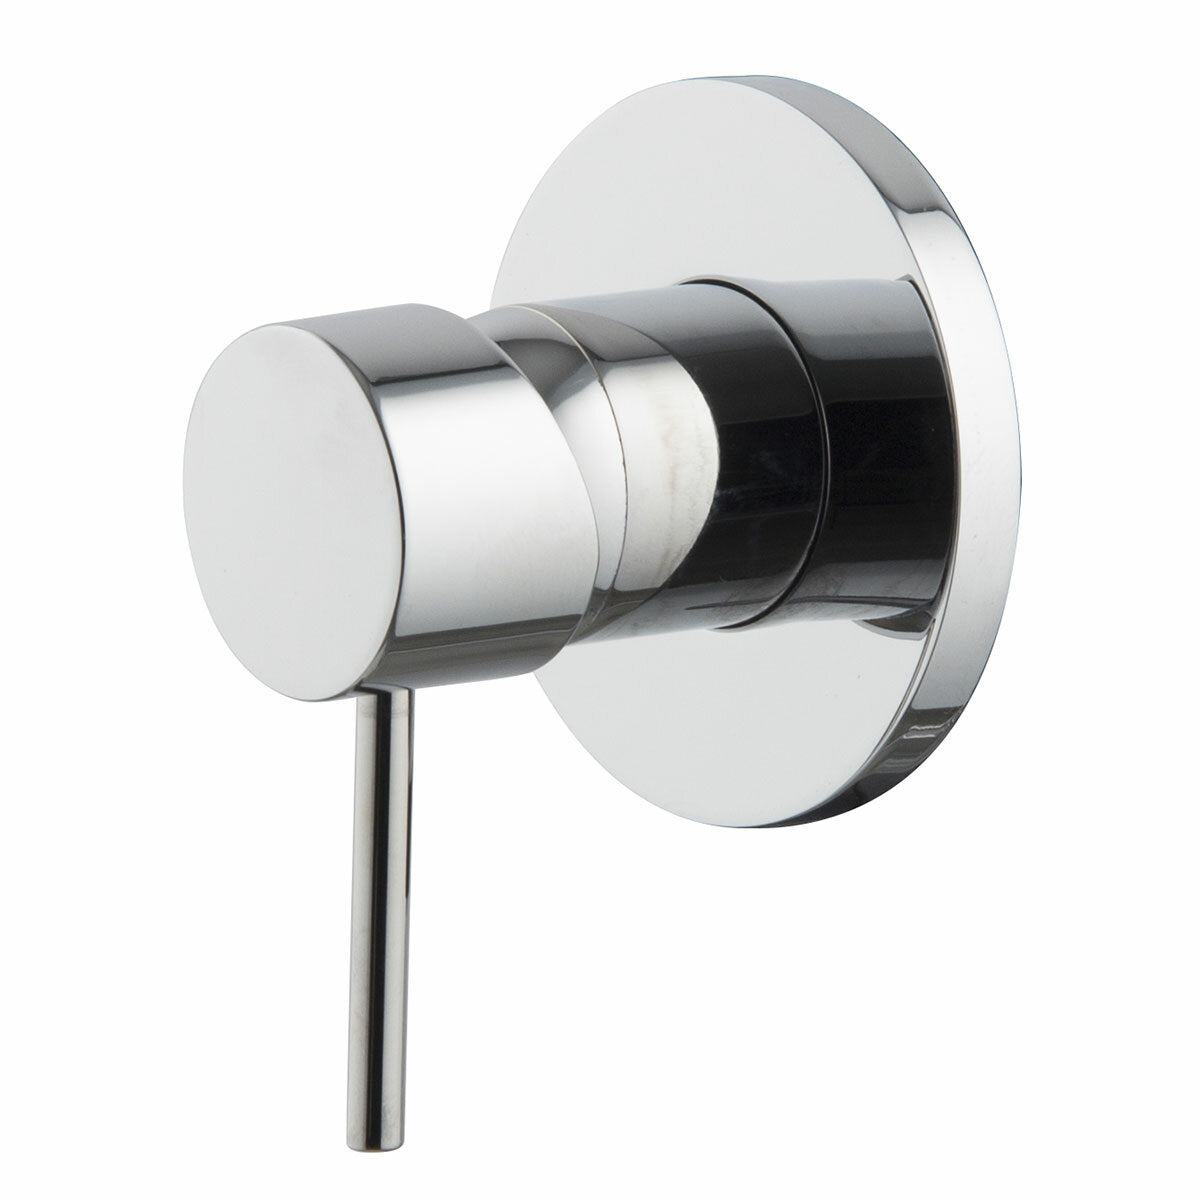 Fima Carlo Frattini built-in shower mixer Spillo Up series